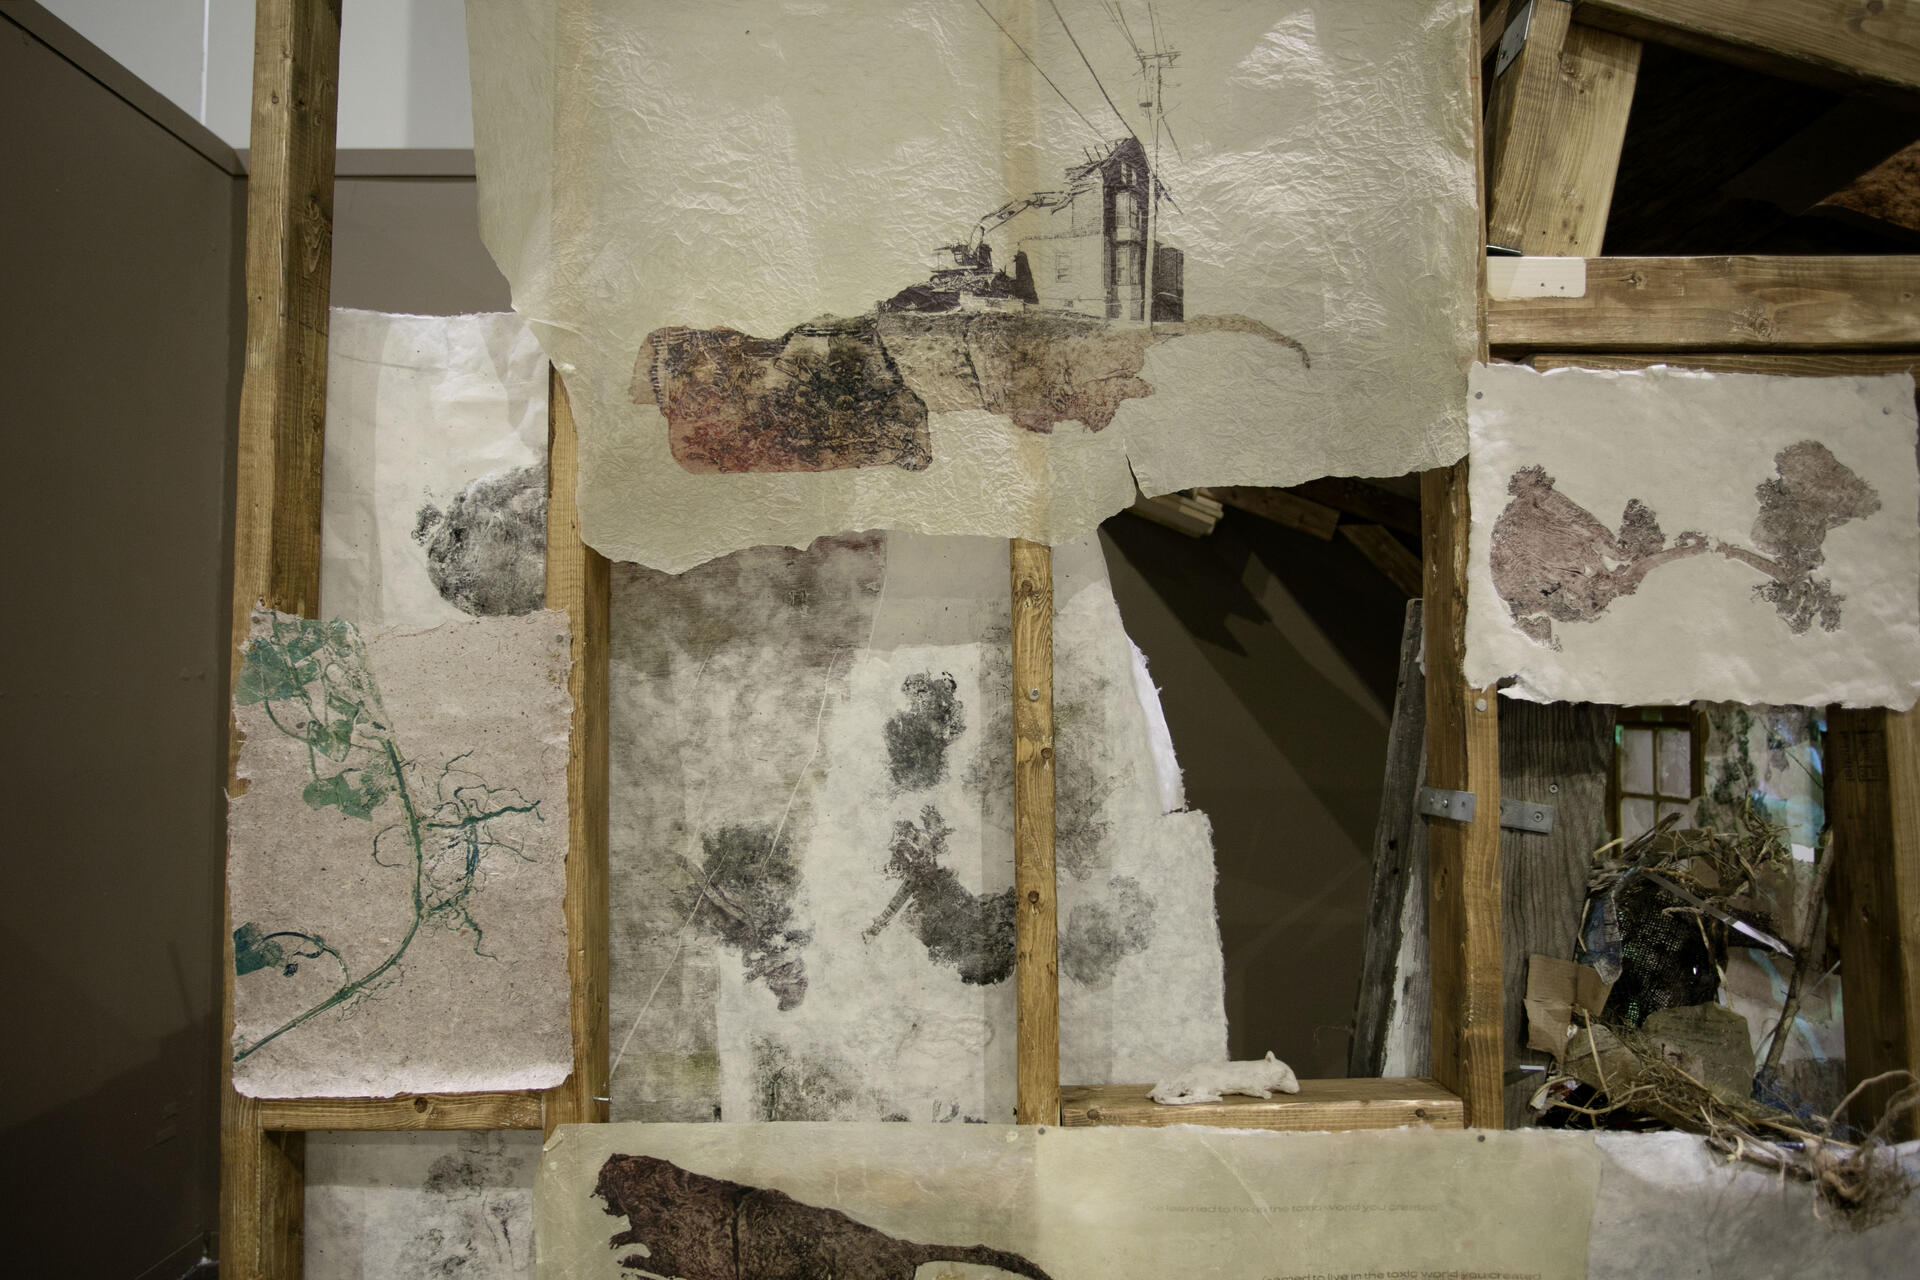 Close up of prints of plants, roadkill remains, and a house in process of being demolished  on top of abstracted forms. Exposed wall framing, nest coming through and small paper rat on a ledge.